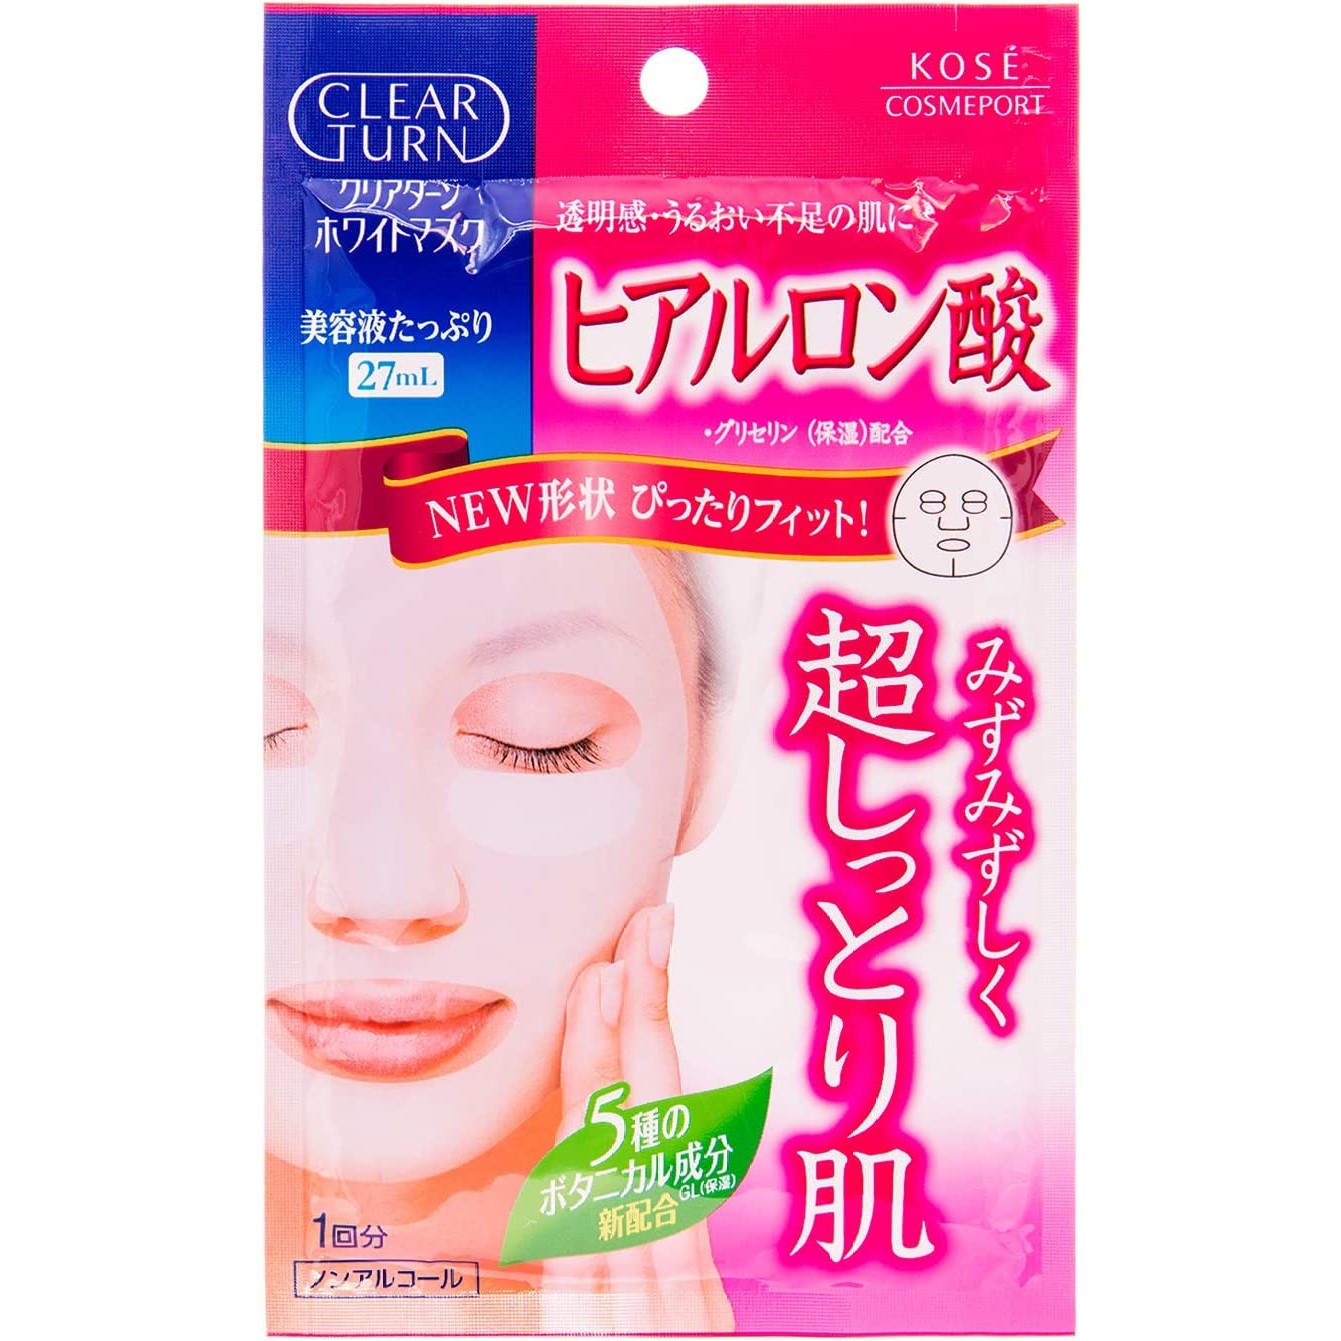 KOSE Clear Turn White Hyaluronic Acid Mask 5pcs (Made in Japan)